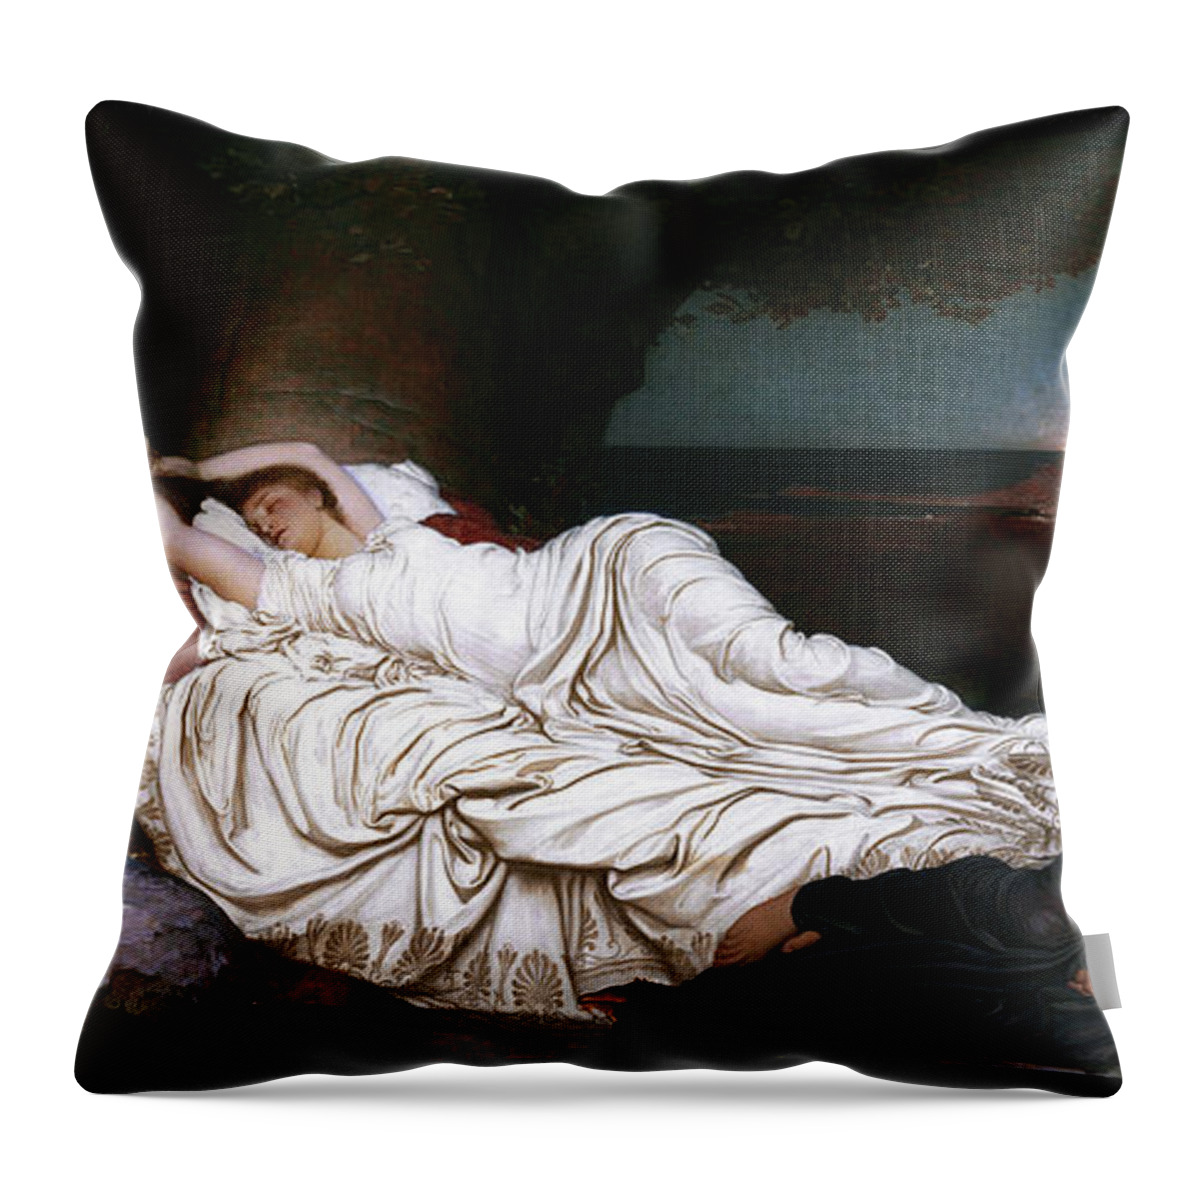 Cymon And Iphigenia Throw Pillow featuring the painting Cymon and Iphigenia by Lord Frederic Leighton by Rolando Burbon